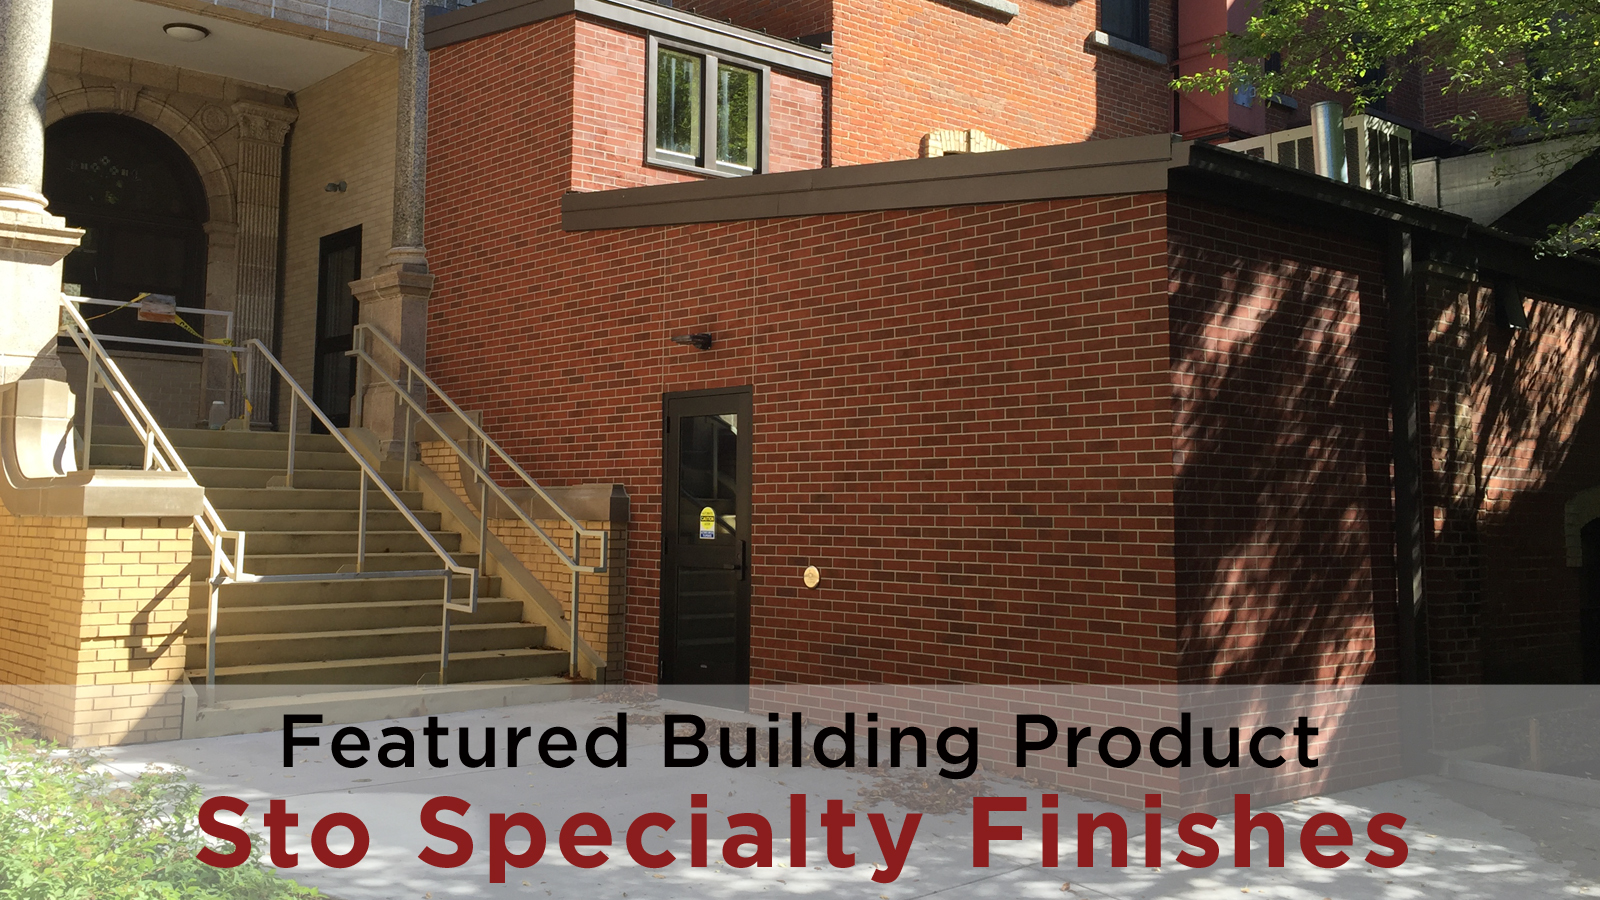 Featured Building Product: Sto Specialty Finishes